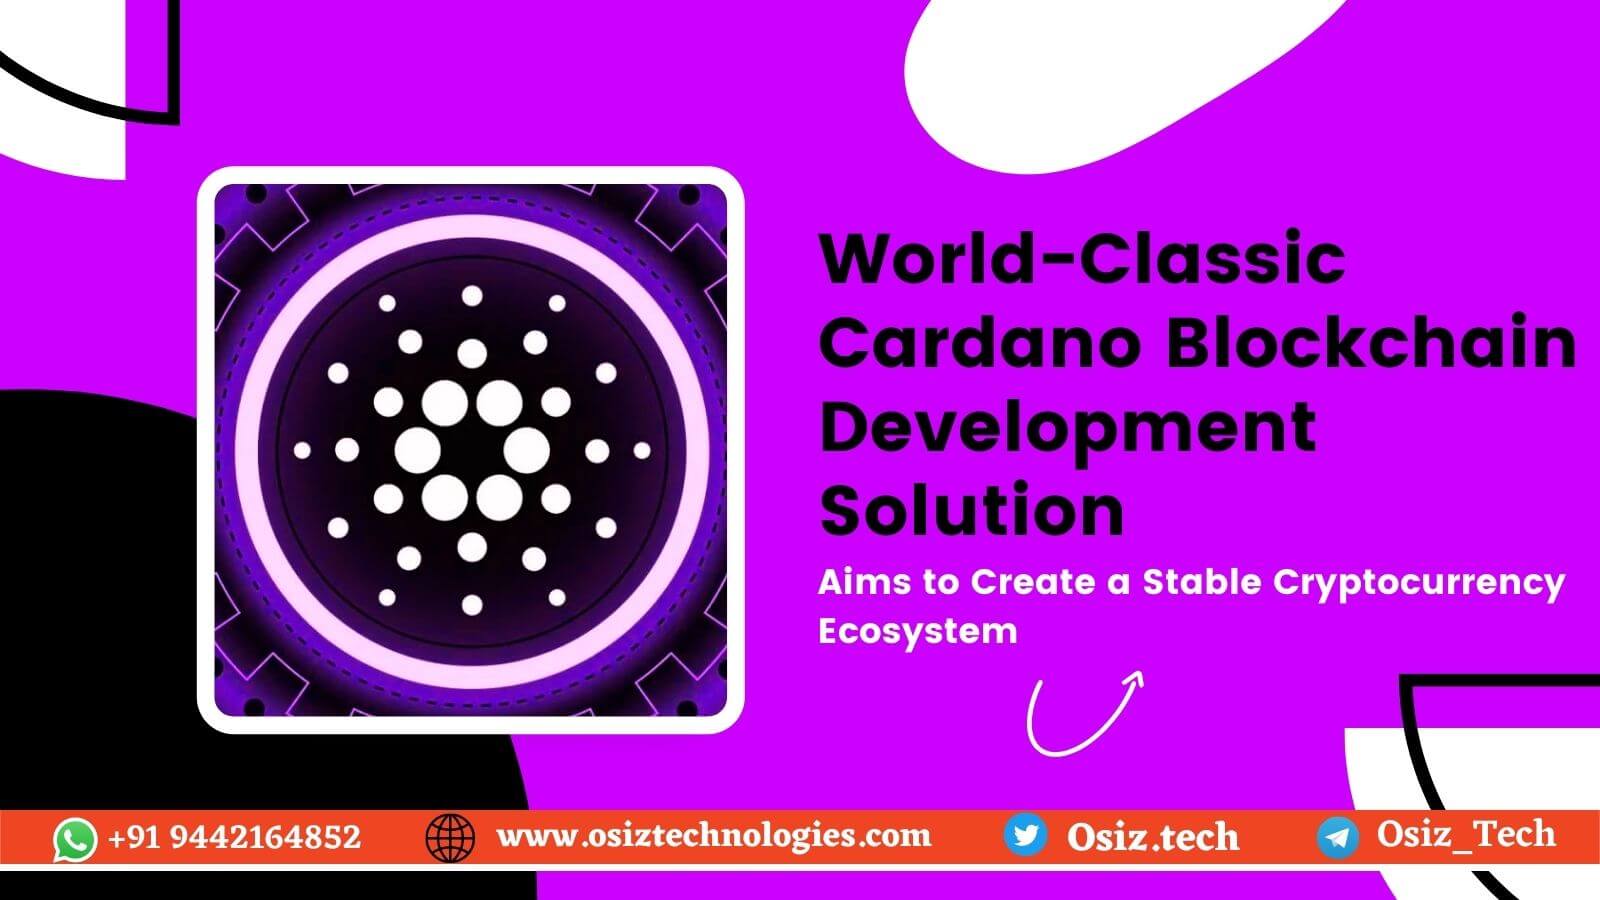 Get Your World-Classic Cardano Application With Our Cardano Blockchain Development company